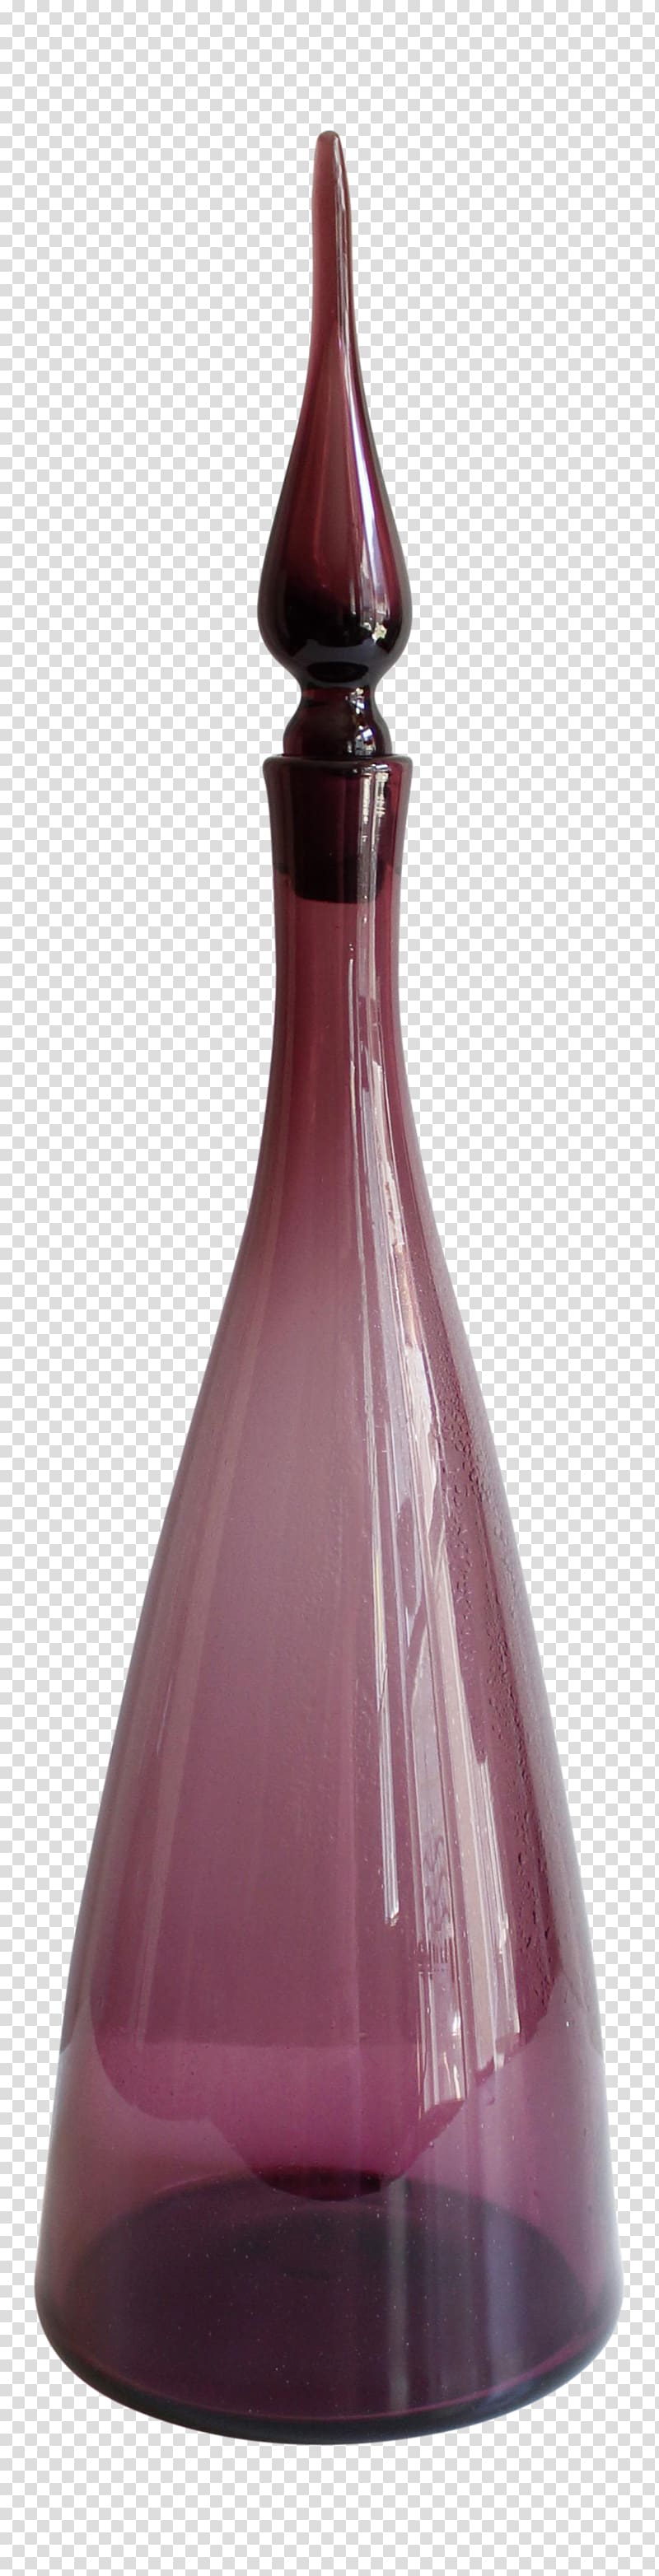 Glass bottle, glass transparent background PNG clipart